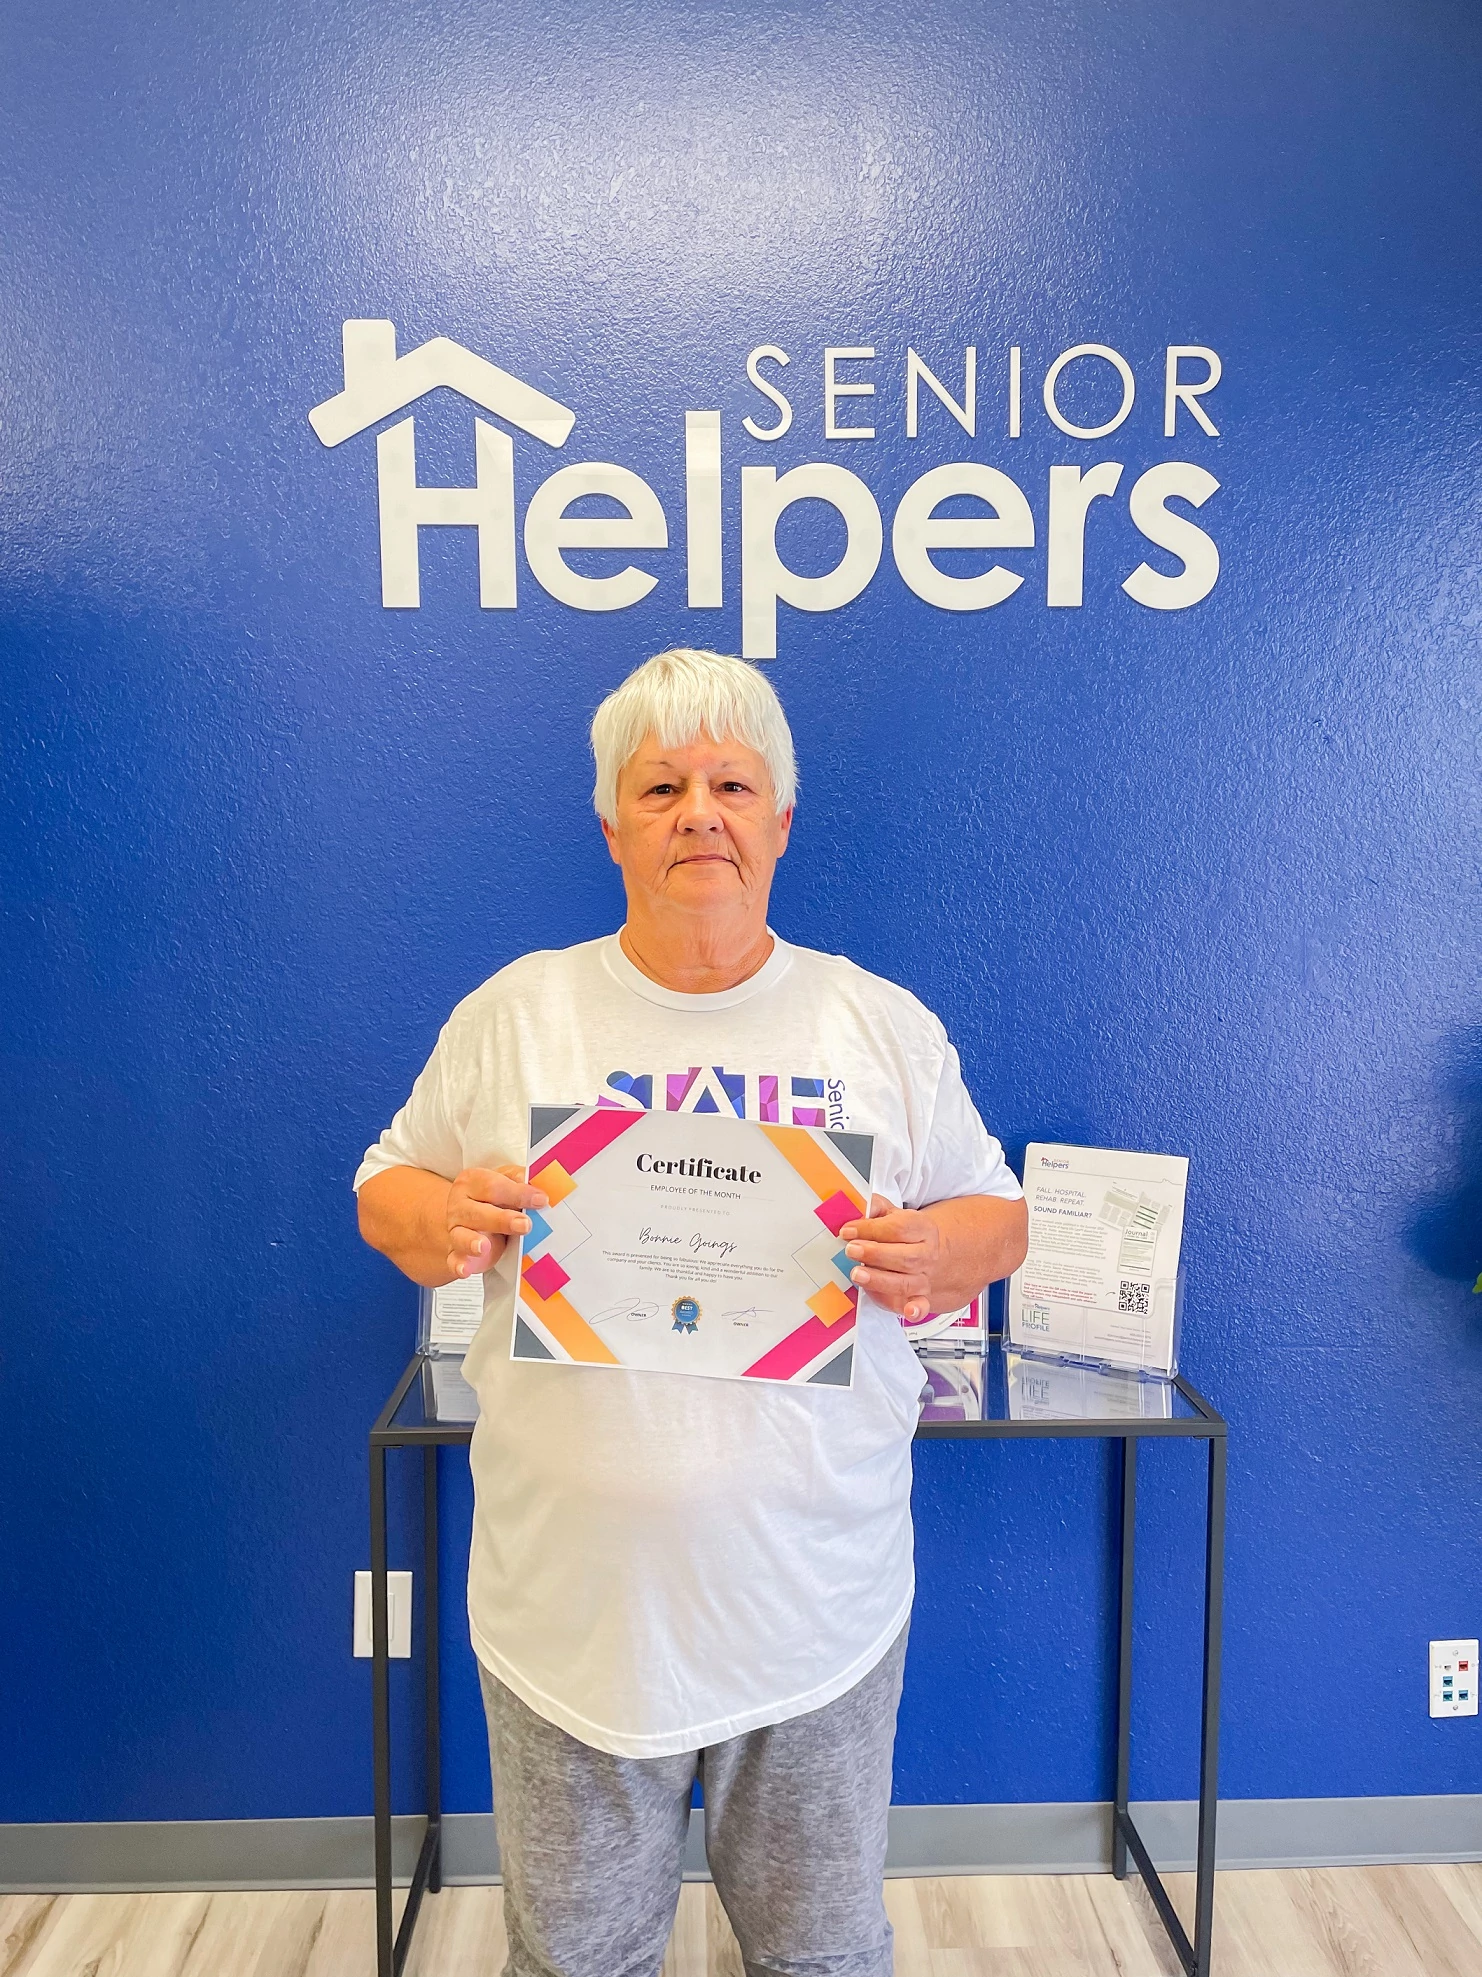 Congratulations to our Caregiver of the Month Bonnie. We appreciate Bonnie’s southern hospitality and worth ethic. From sewing buttons on clothes to making her Tennessee pot pie Bonnie has made our families extremely happy. We want to thank Bonnie for being part of our family and caring for the families we support and serve.